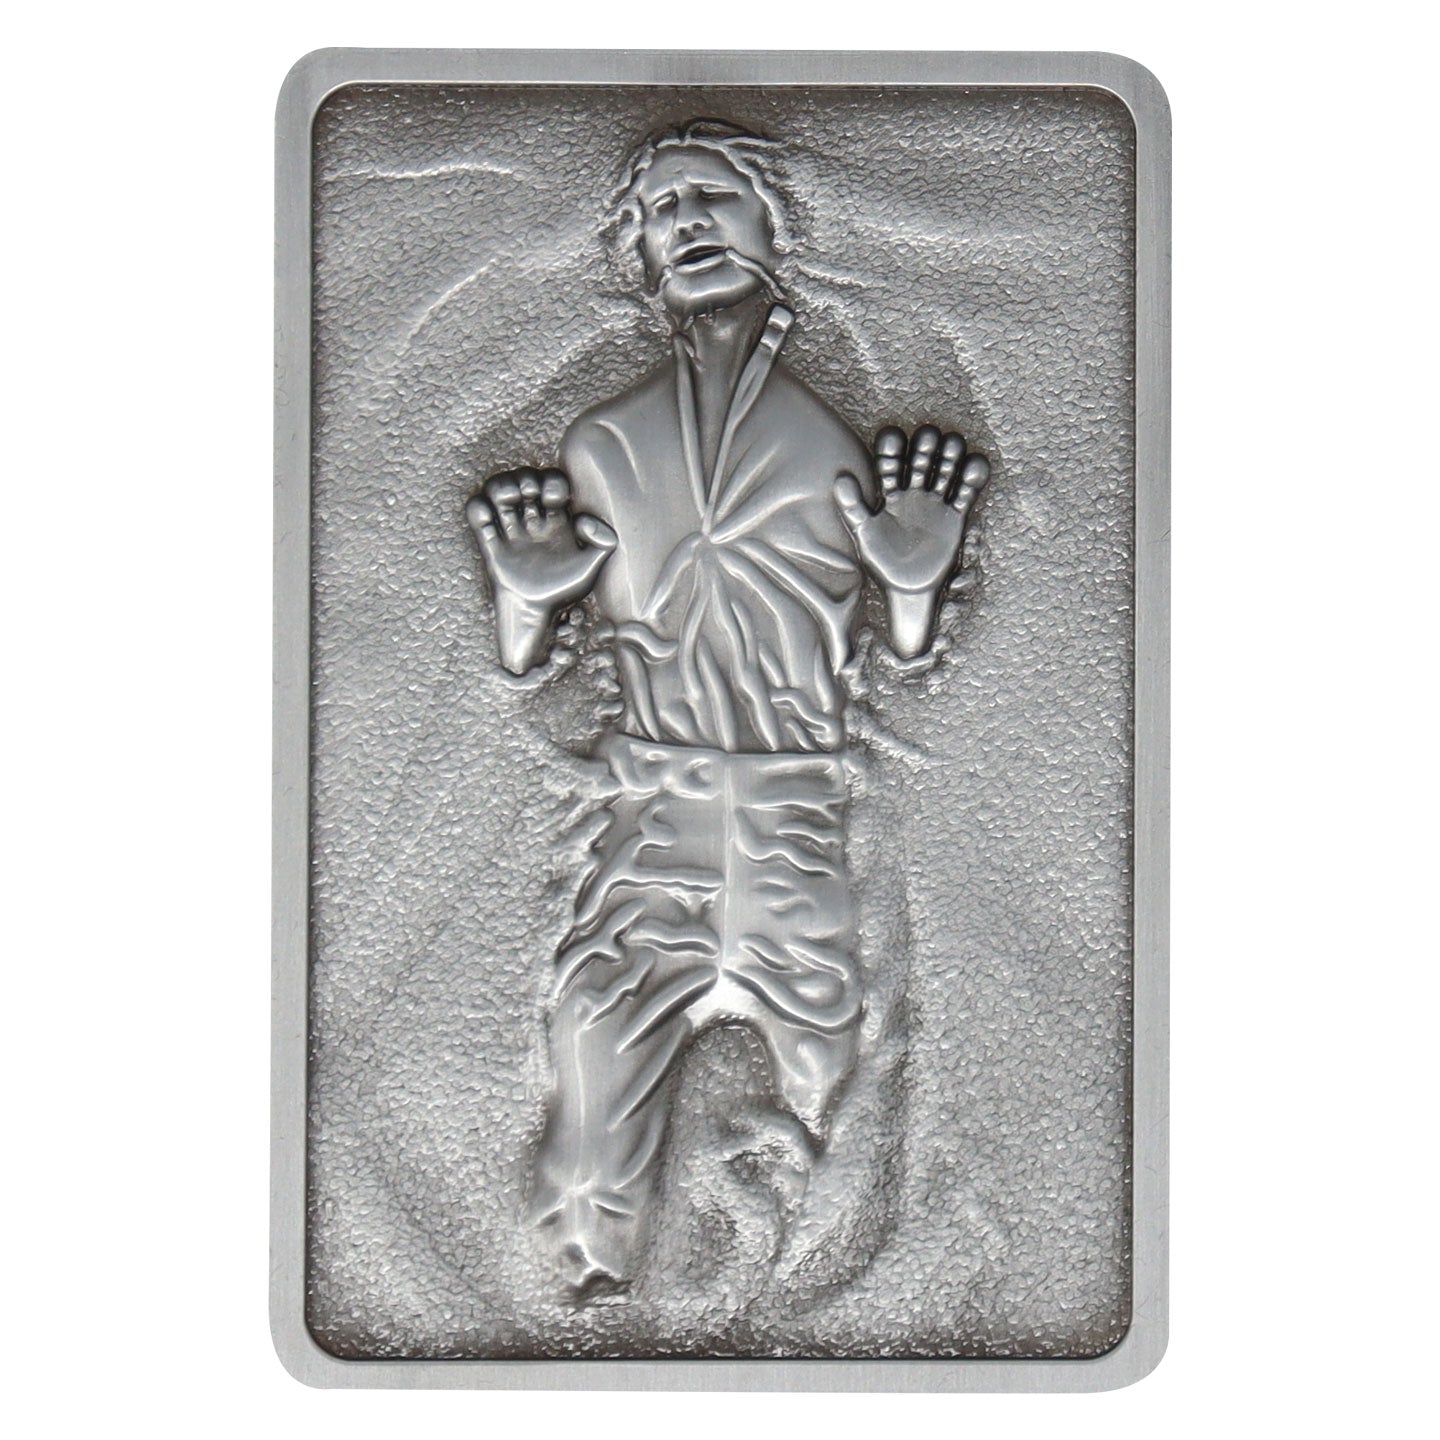 Star Wars Limited Edition Han Solo in Carbonite Ingot